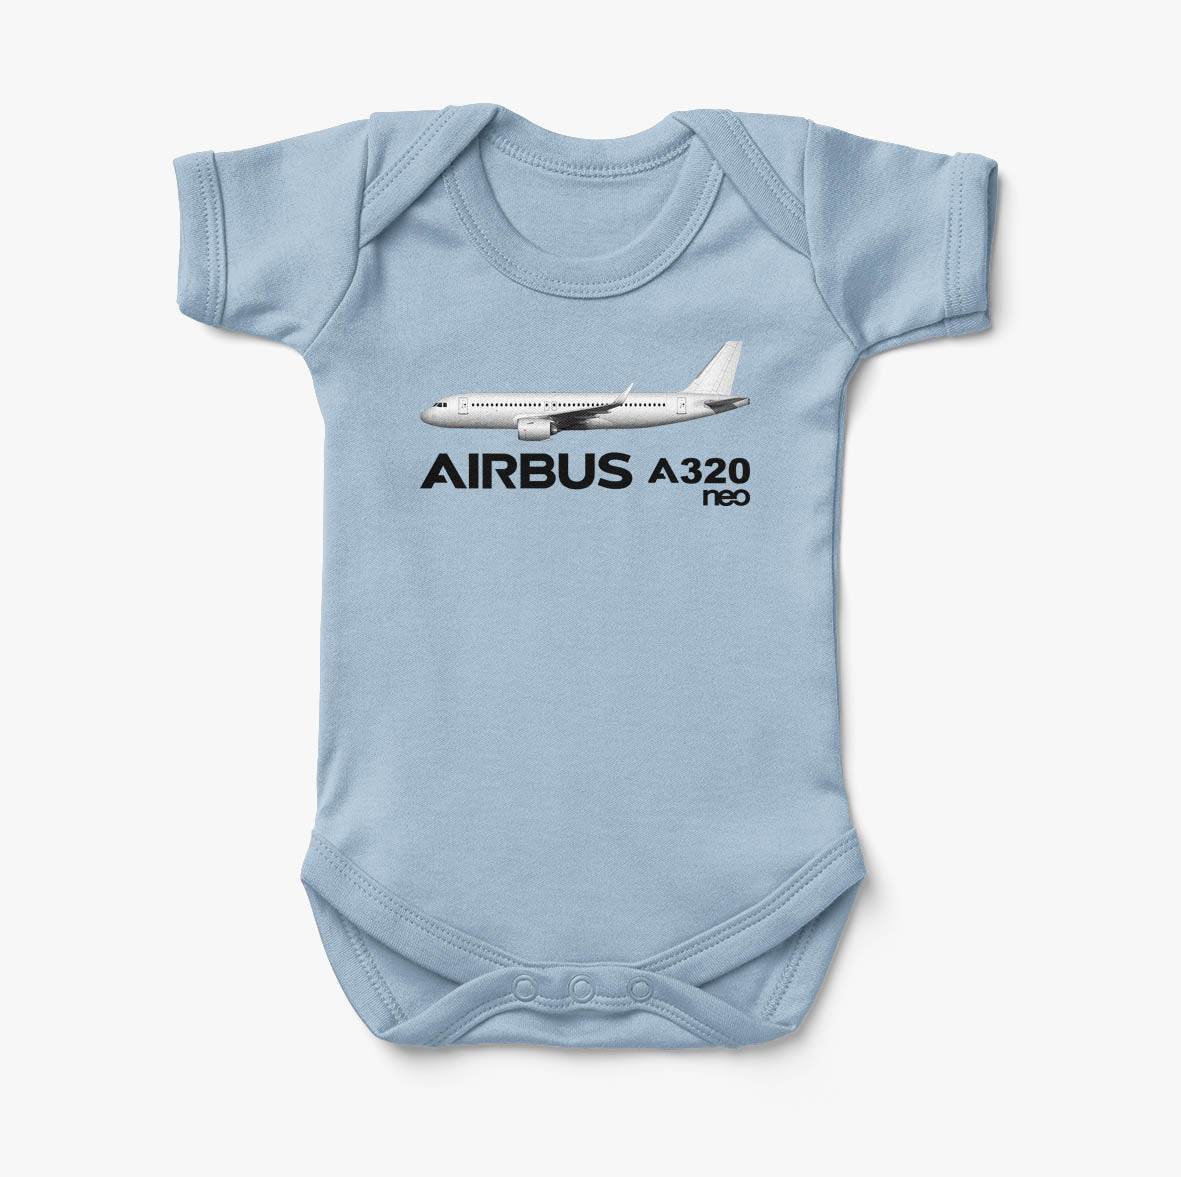 The Airbus A320Neo Designed Baby Bodysuits